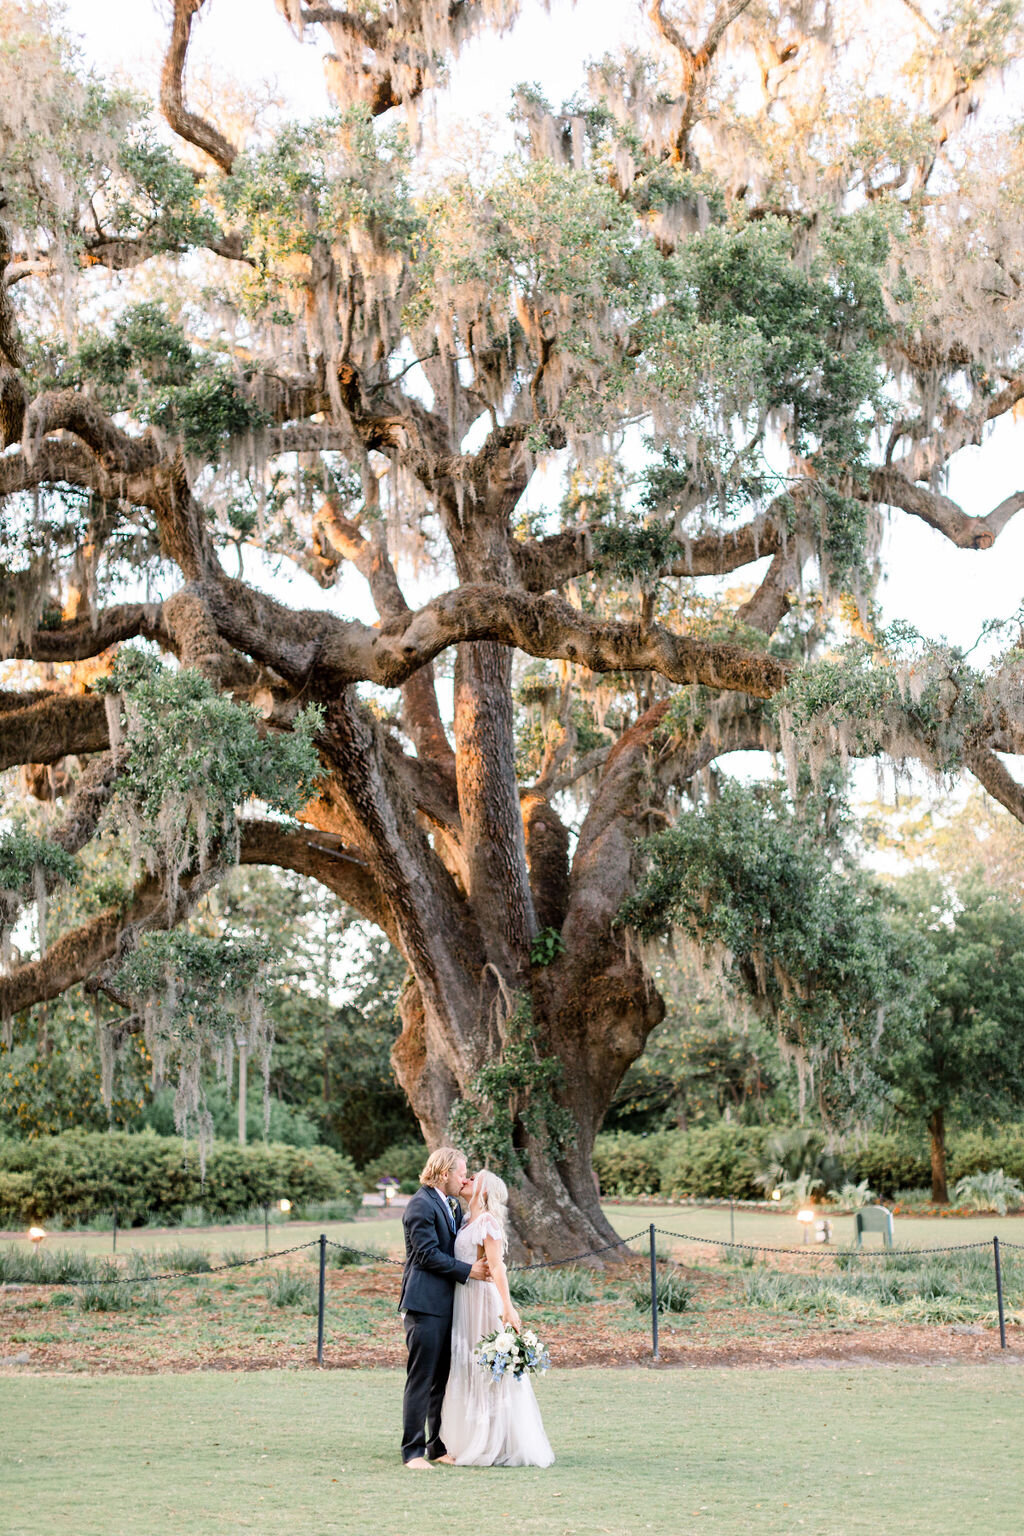 Blair&Timmy_AirlieGardens_ErinL.TaylorPhotography-1215